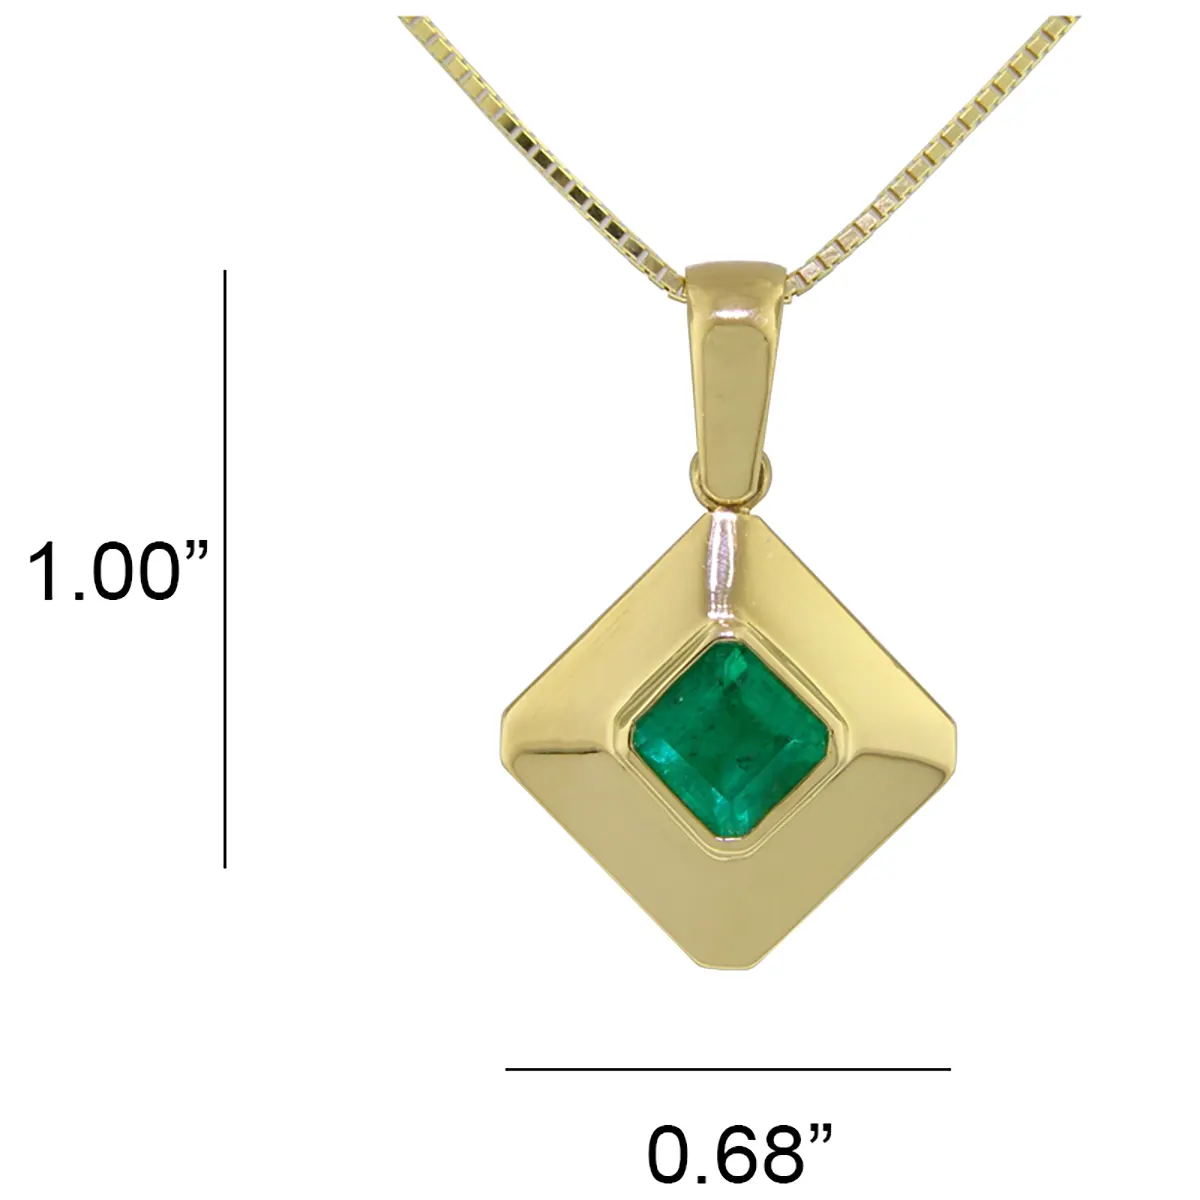 The dimensions of this single stone emerald pendant are 1 inch high, from the top of the bail, by 0.68 inches wide